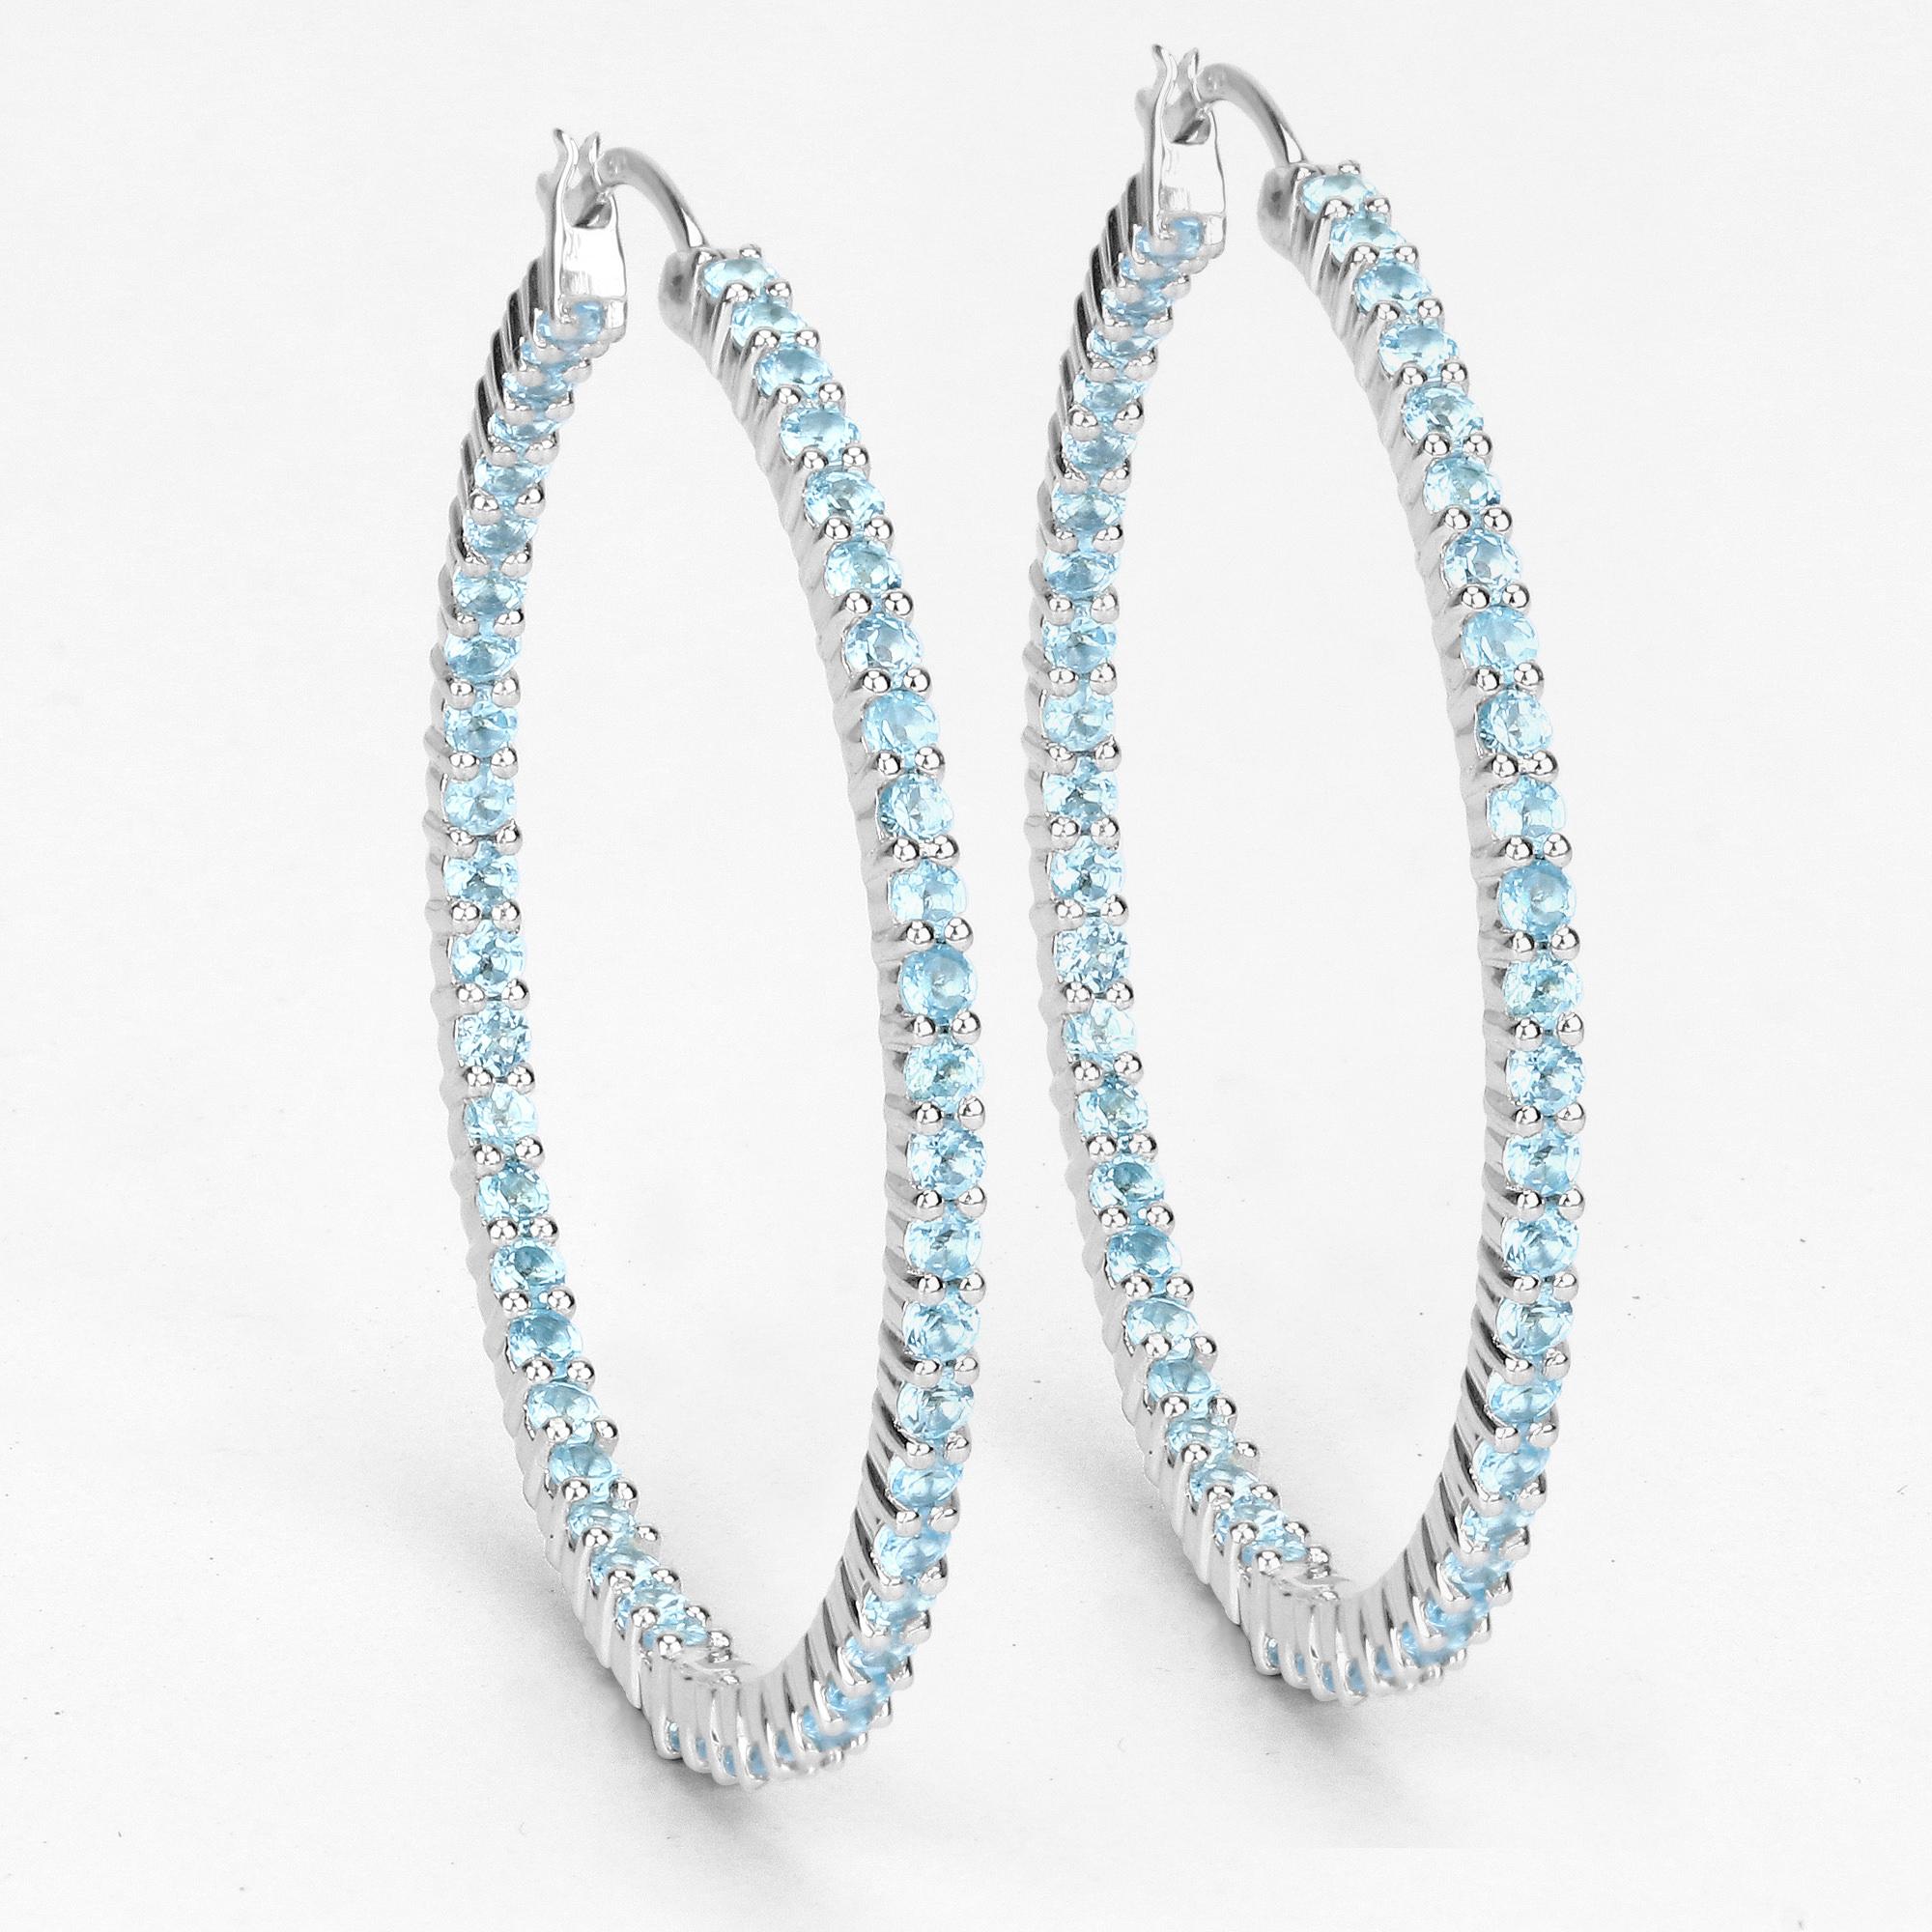 Contemporary Natural Swiss Blue Topaz Hoop Earrings Total 3.60 Carats Rhodium Plated Silver For Sale